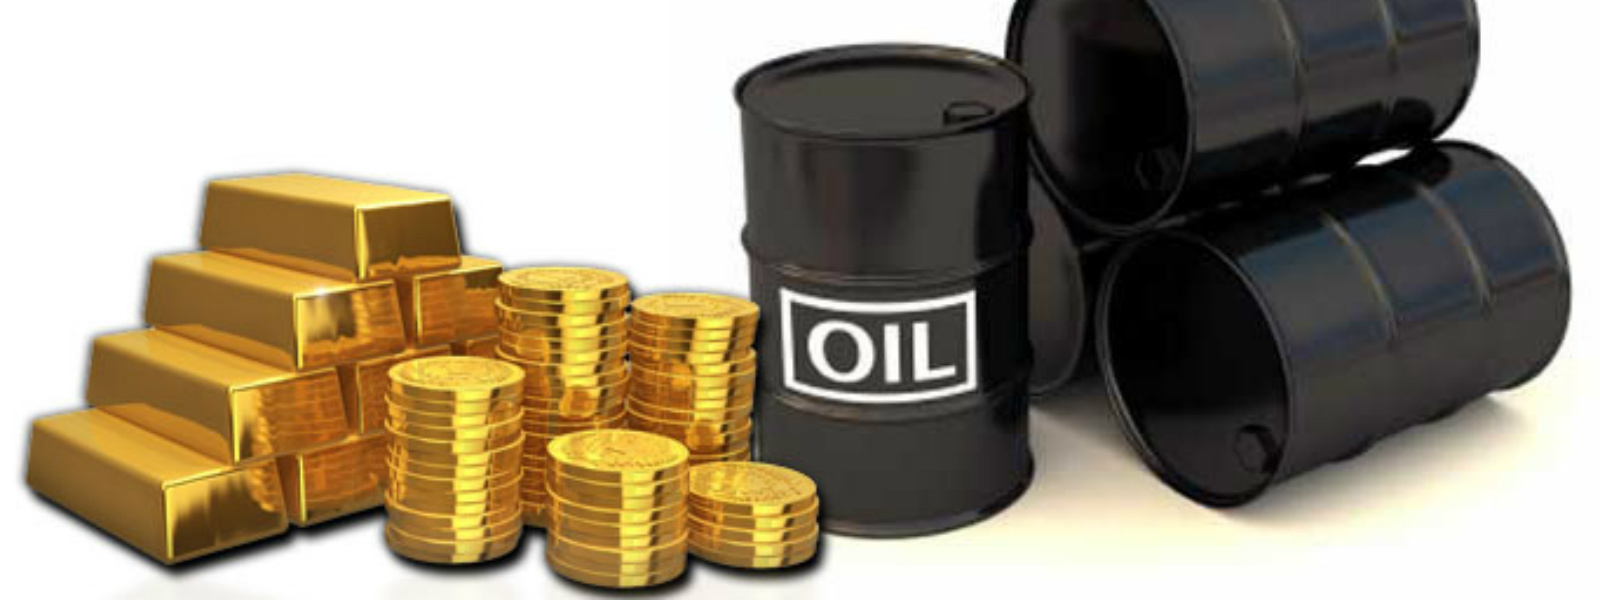 Crude oil prices drop in the world market